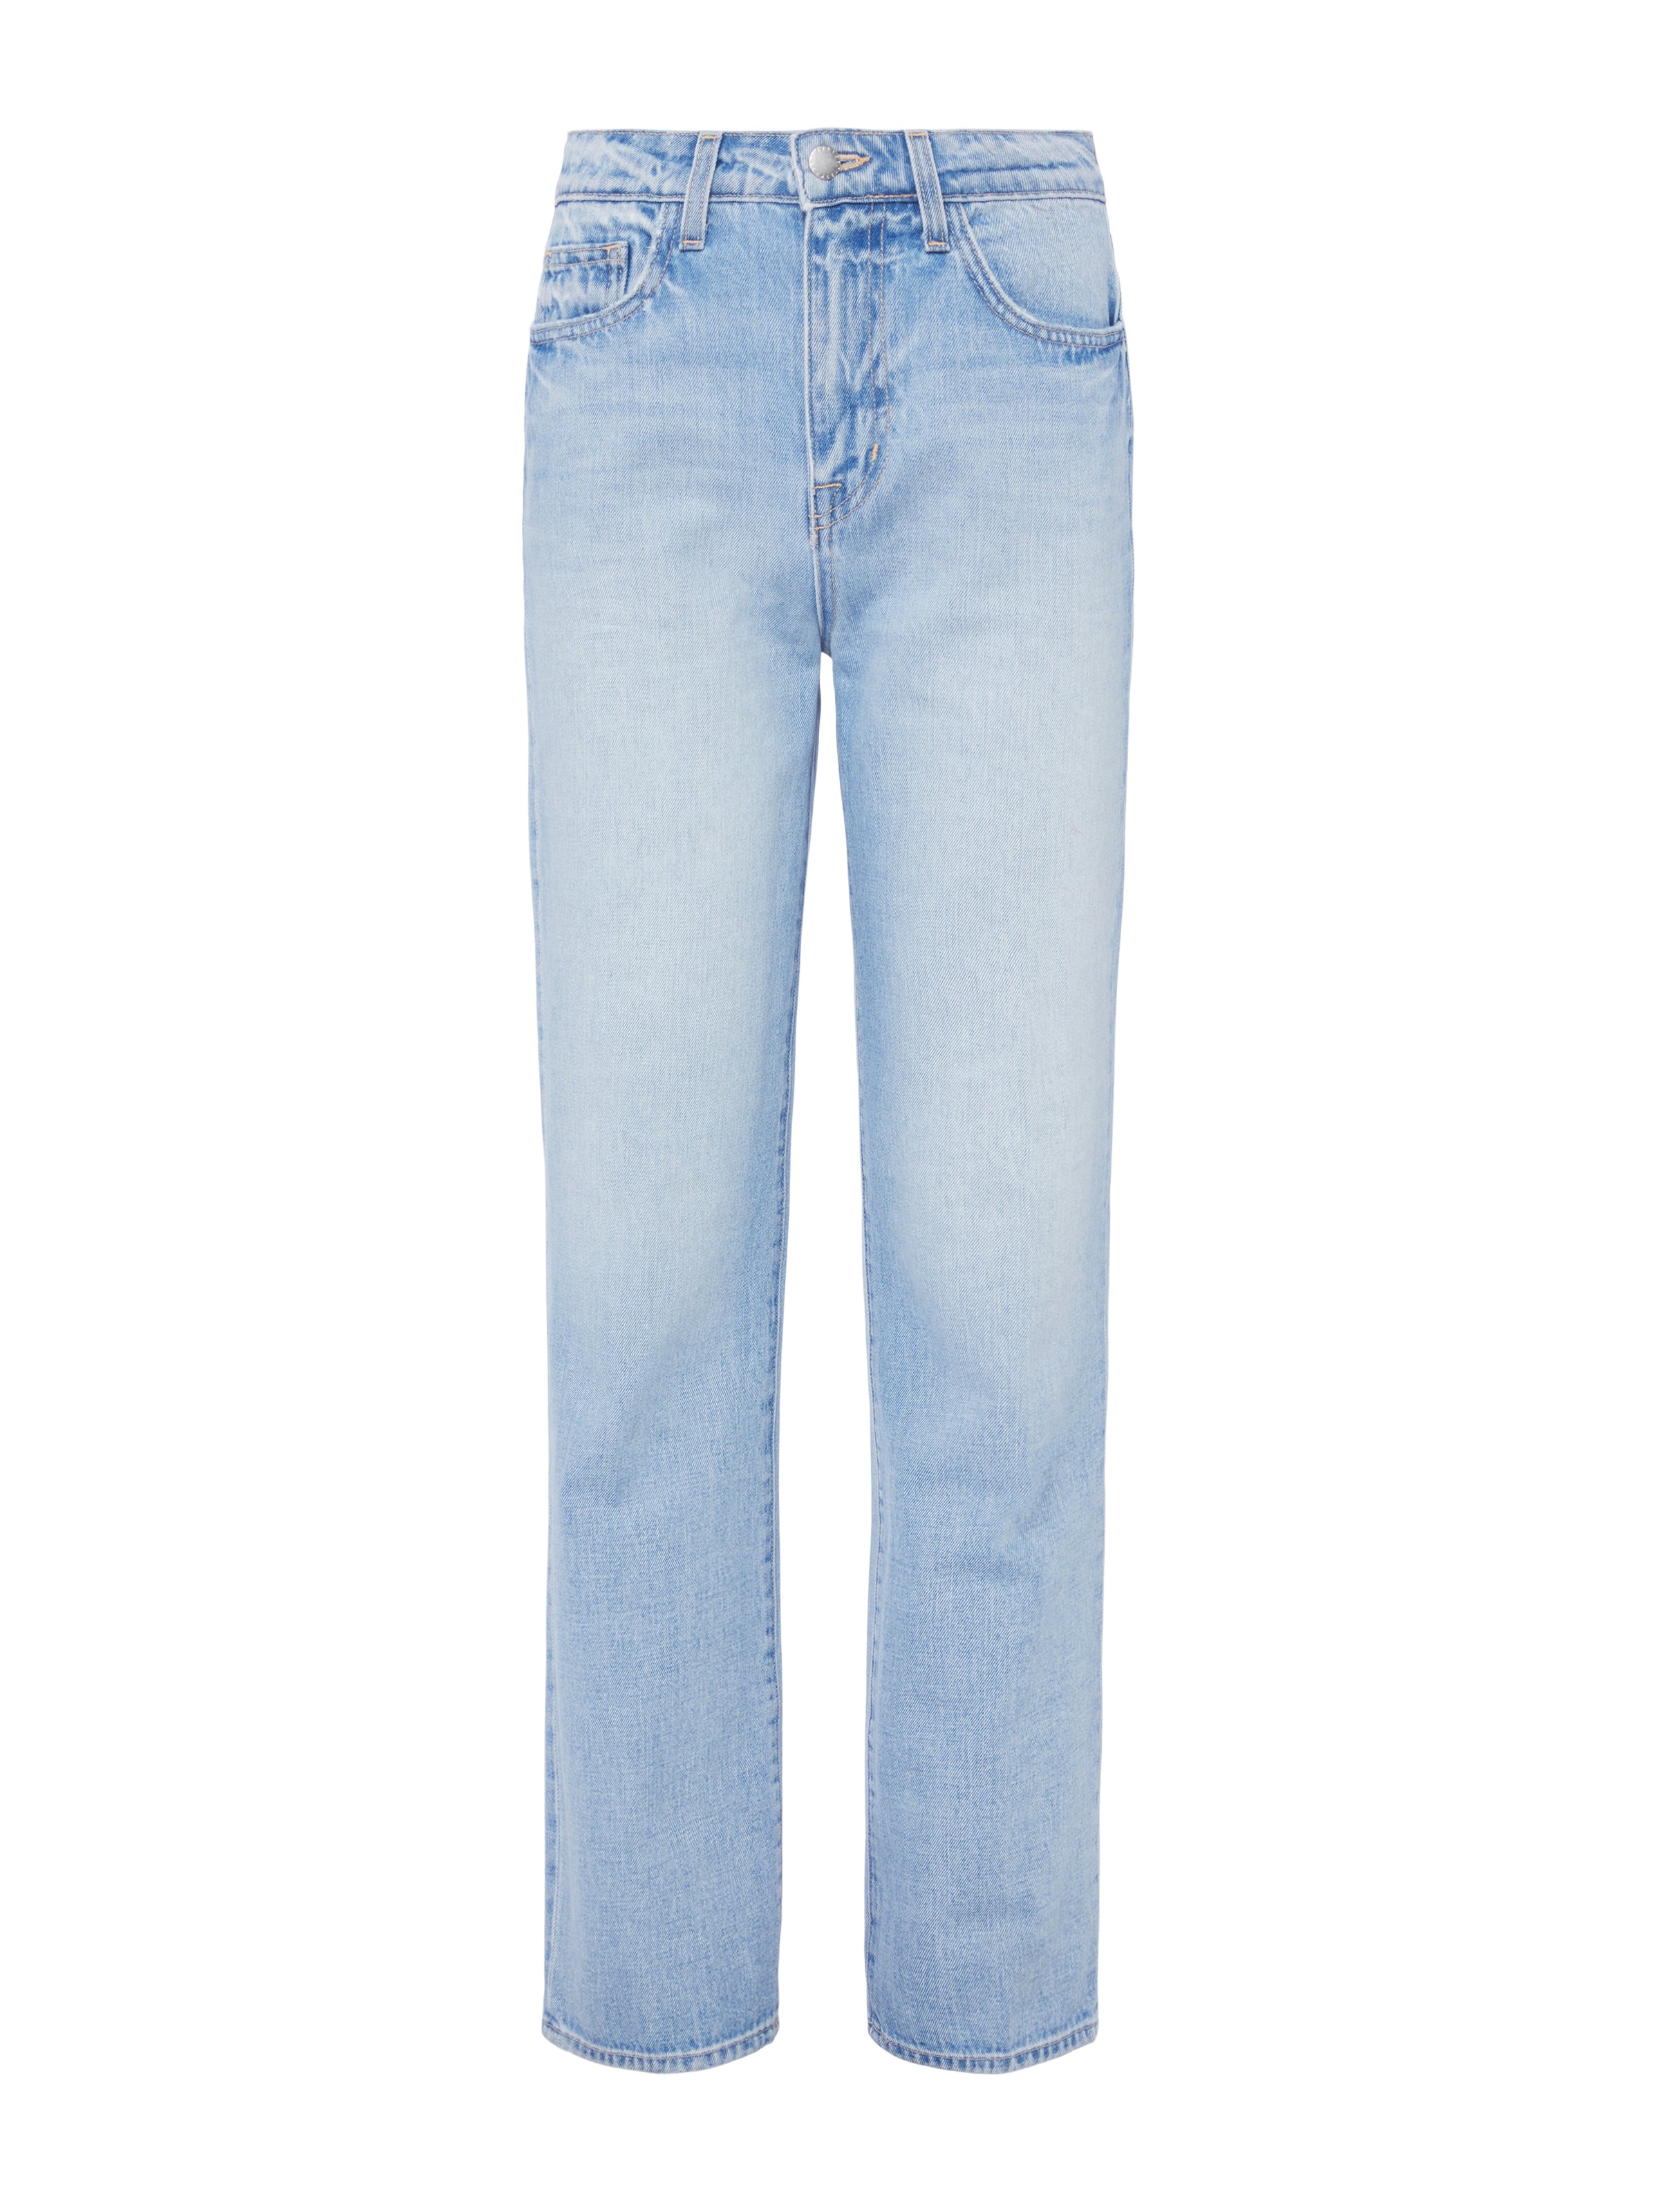 Grands Light Blue Men's Summer Jeans - Comfortable Jeans by Mugsy